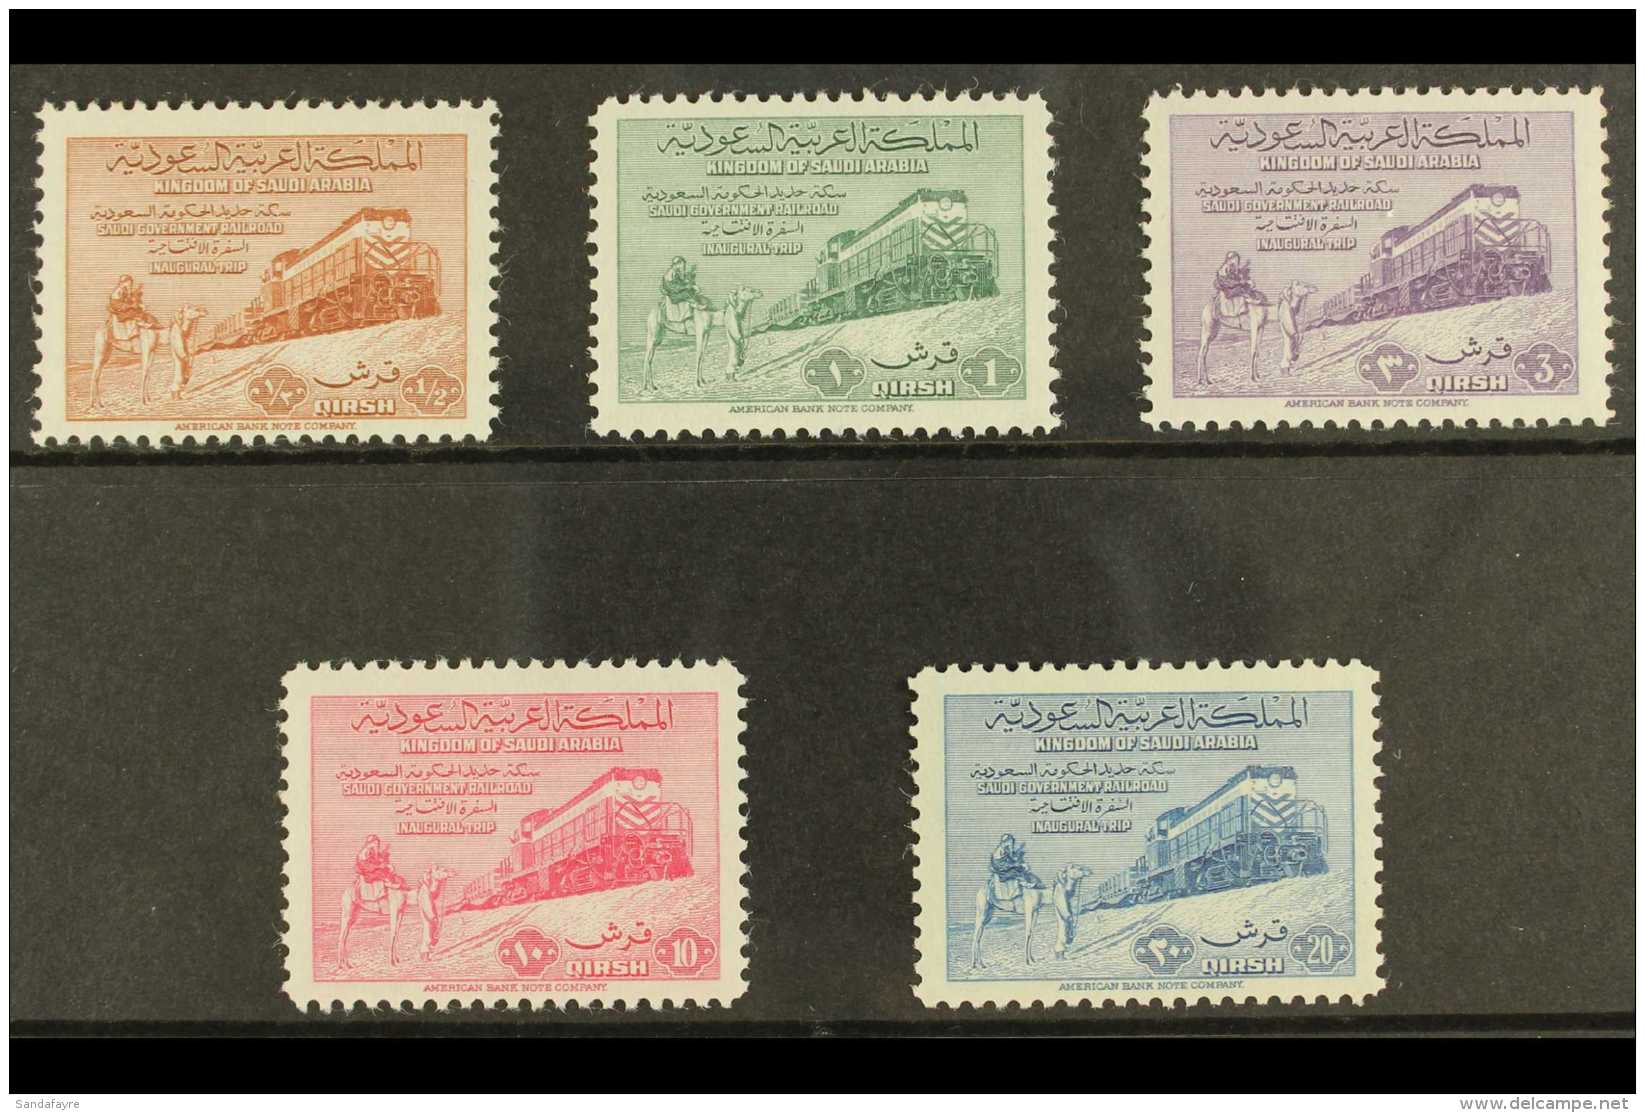 1952 Dammam-Riyadh Railway Complete Set, SG 372/376, Very Fine Mint, Only Very Lightly Hinged. (5 Stamps) For More... - Saudi Arabia